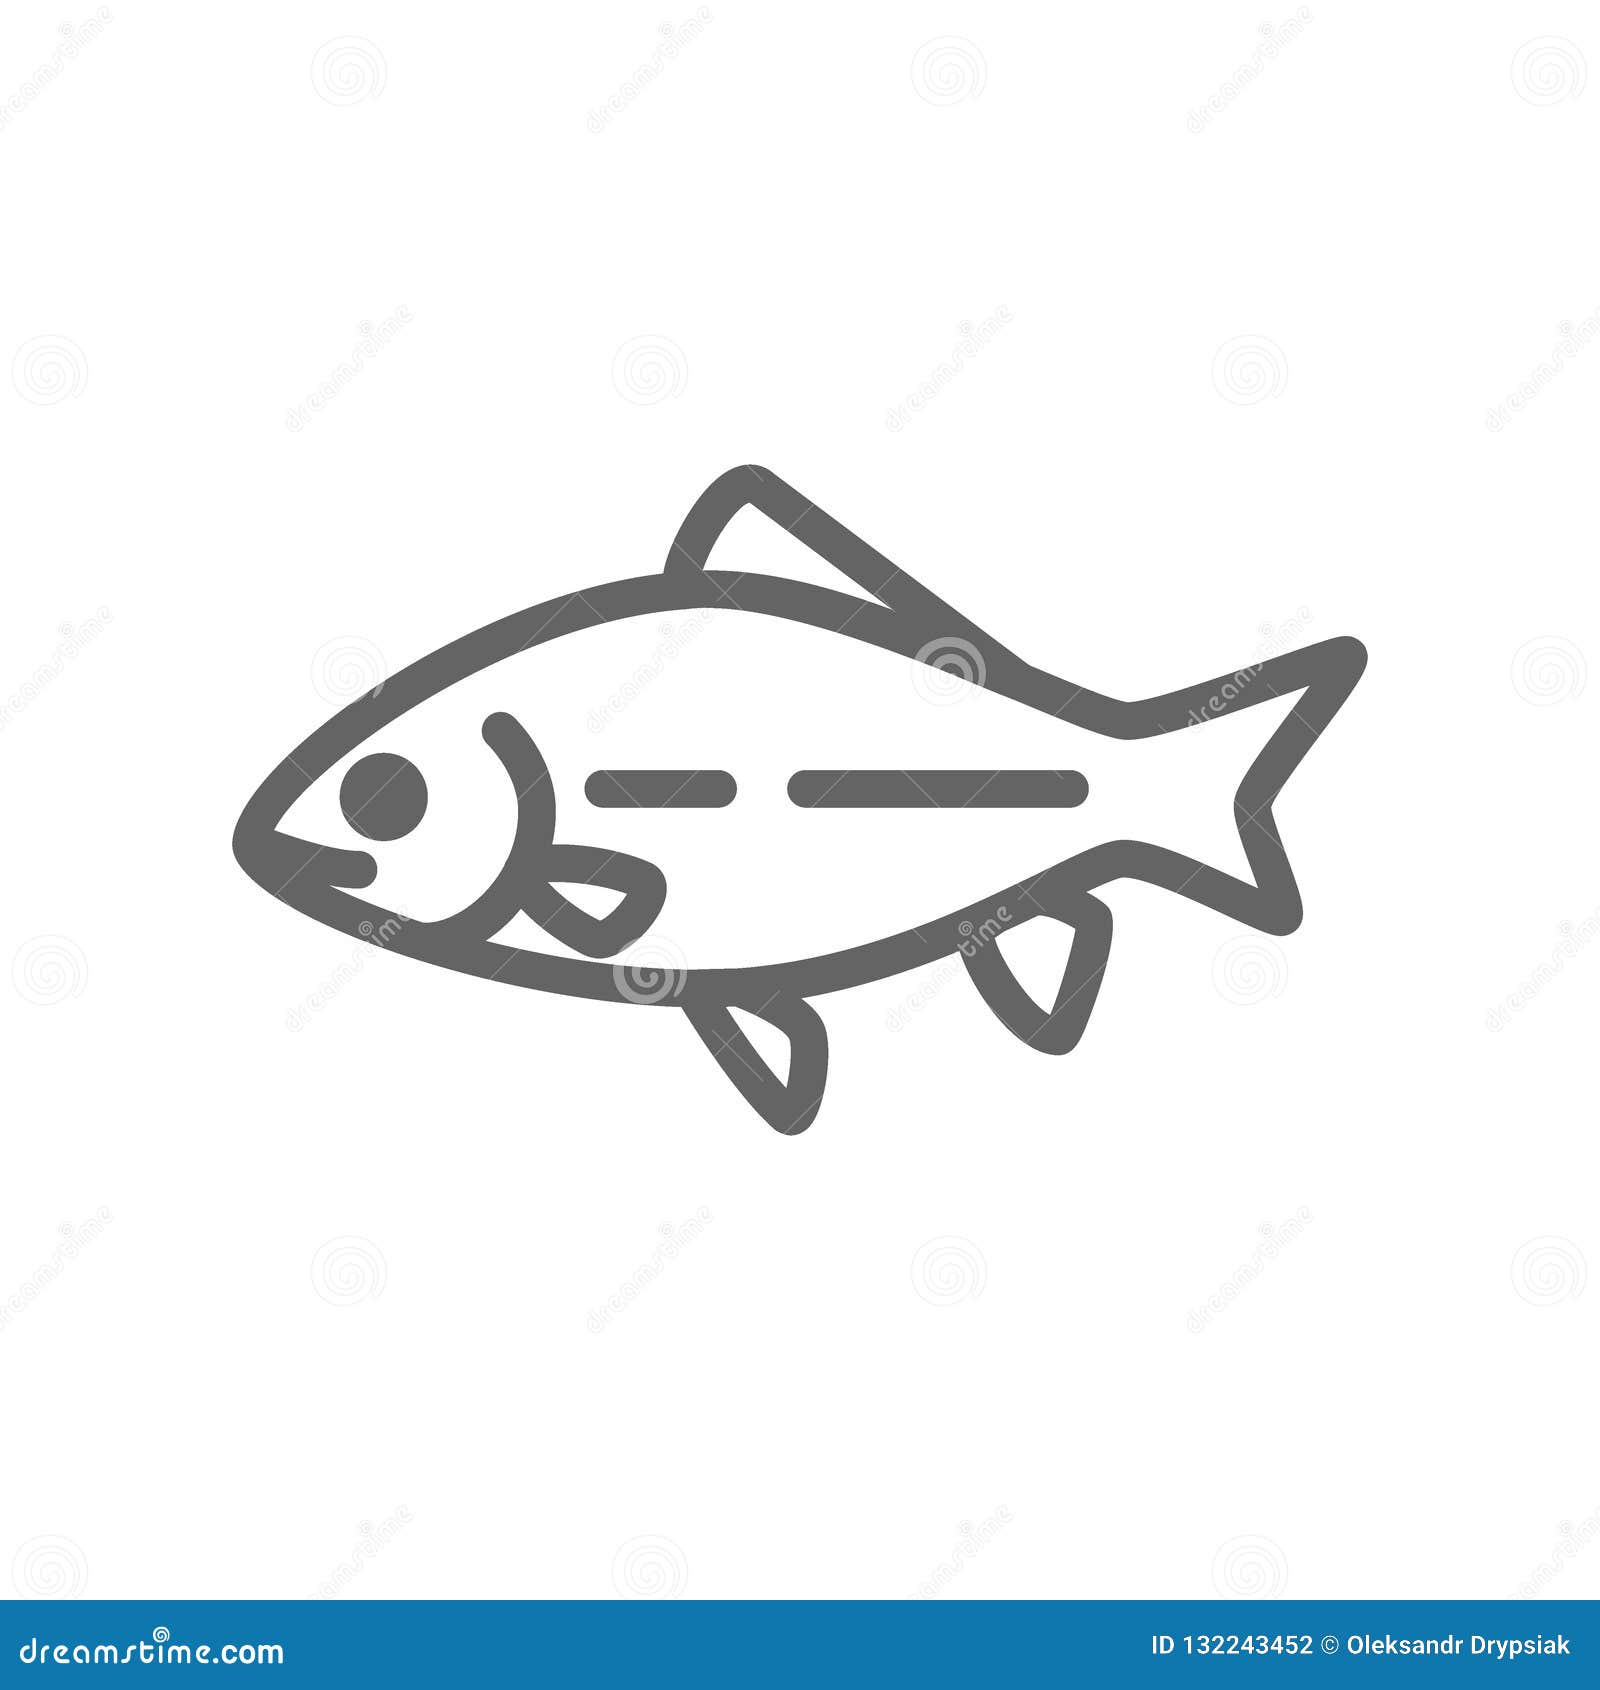 Simple Fish and Carp Line Icon. Symbol and Sign Illustration Design.  Isolated on White Background Stock Illustration - Illustration of design,  food: 132243452